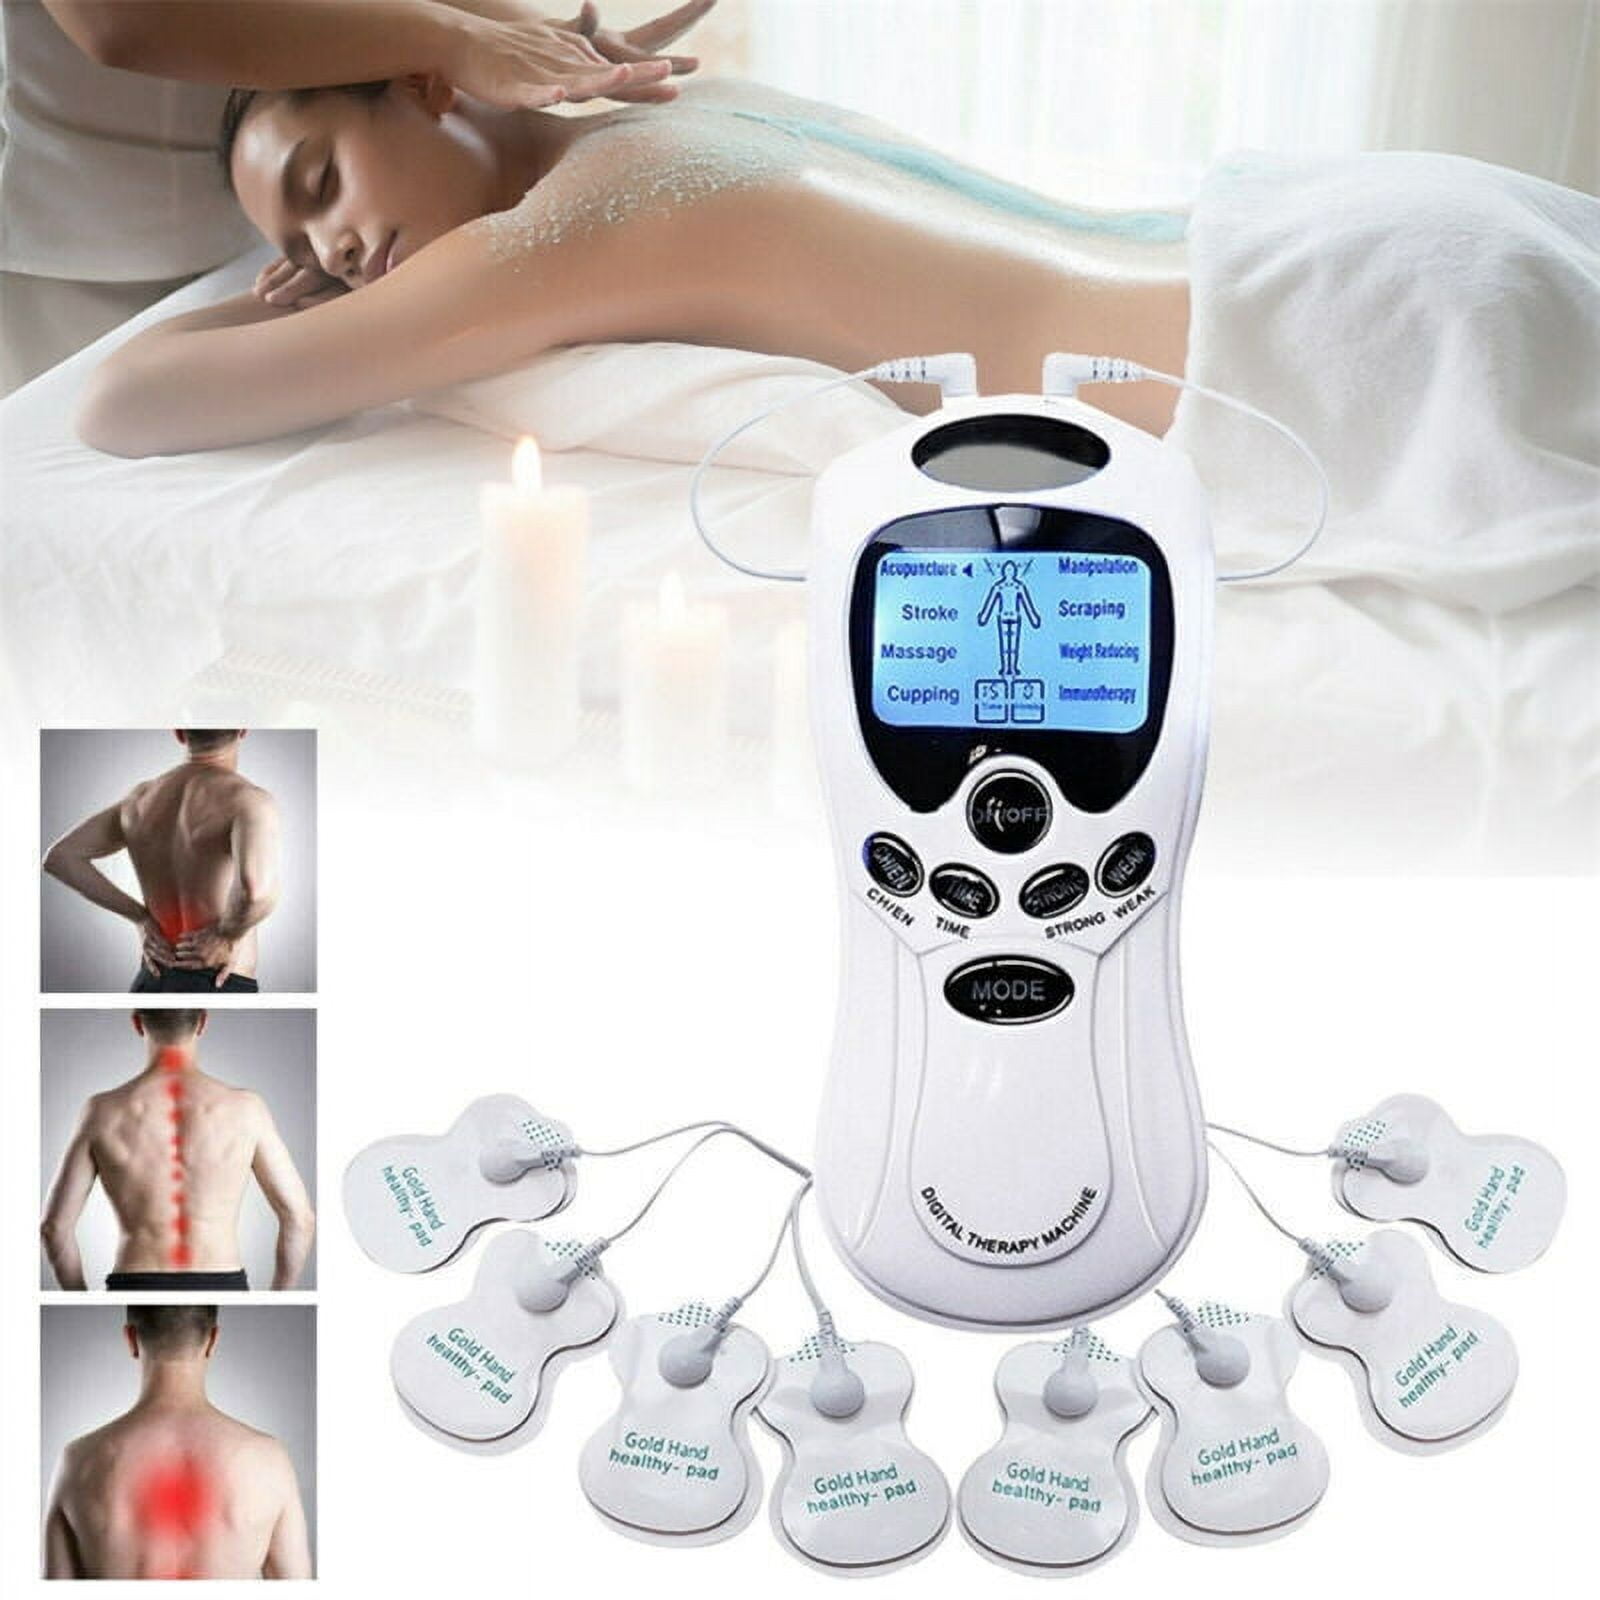 Electronic Pulse Massage Neck and Back Massager Muscle Stimulator - Therapy  Pulse Electrical Massager Electronic Body Massage Device, Digital Tens